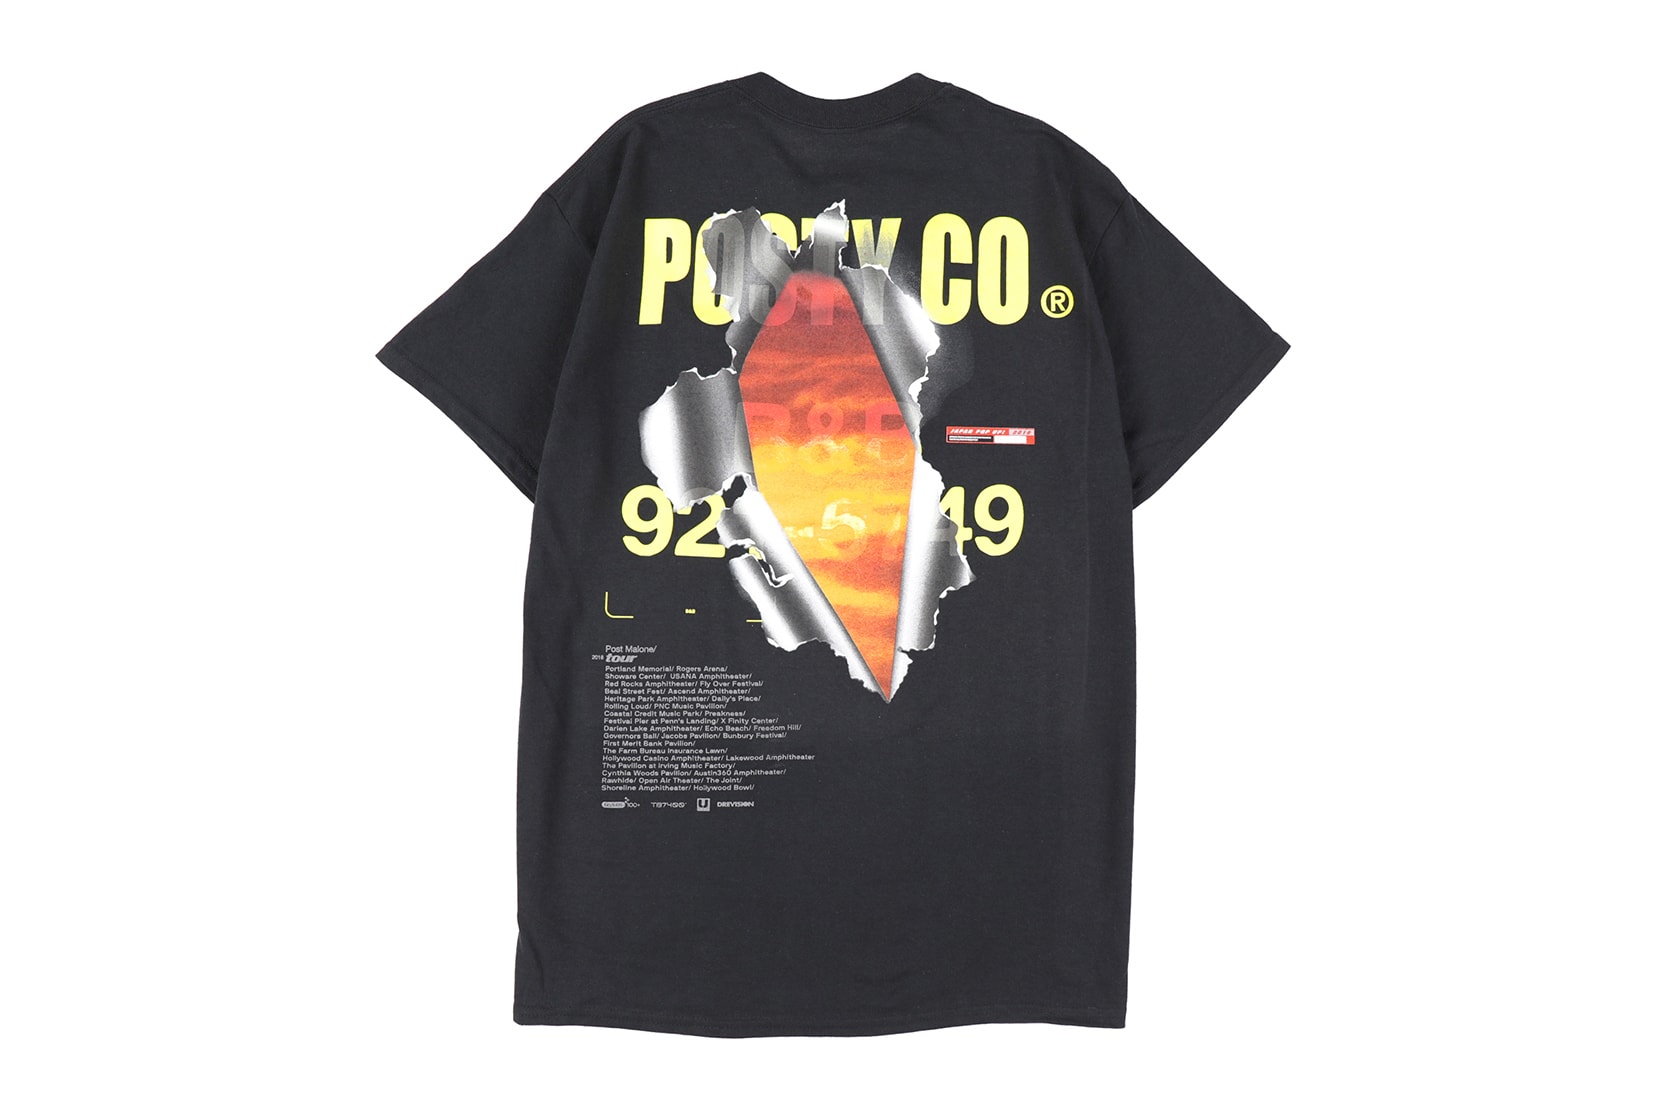 Post Malone Nubian Pop Up Store Shop Clothing Collection Buy Purchase Cop Long Sleeve Short Sleeve T-Shirts Beanies Tote Bags exclusive merch july 28 29 2018 limited edition exclusive tour